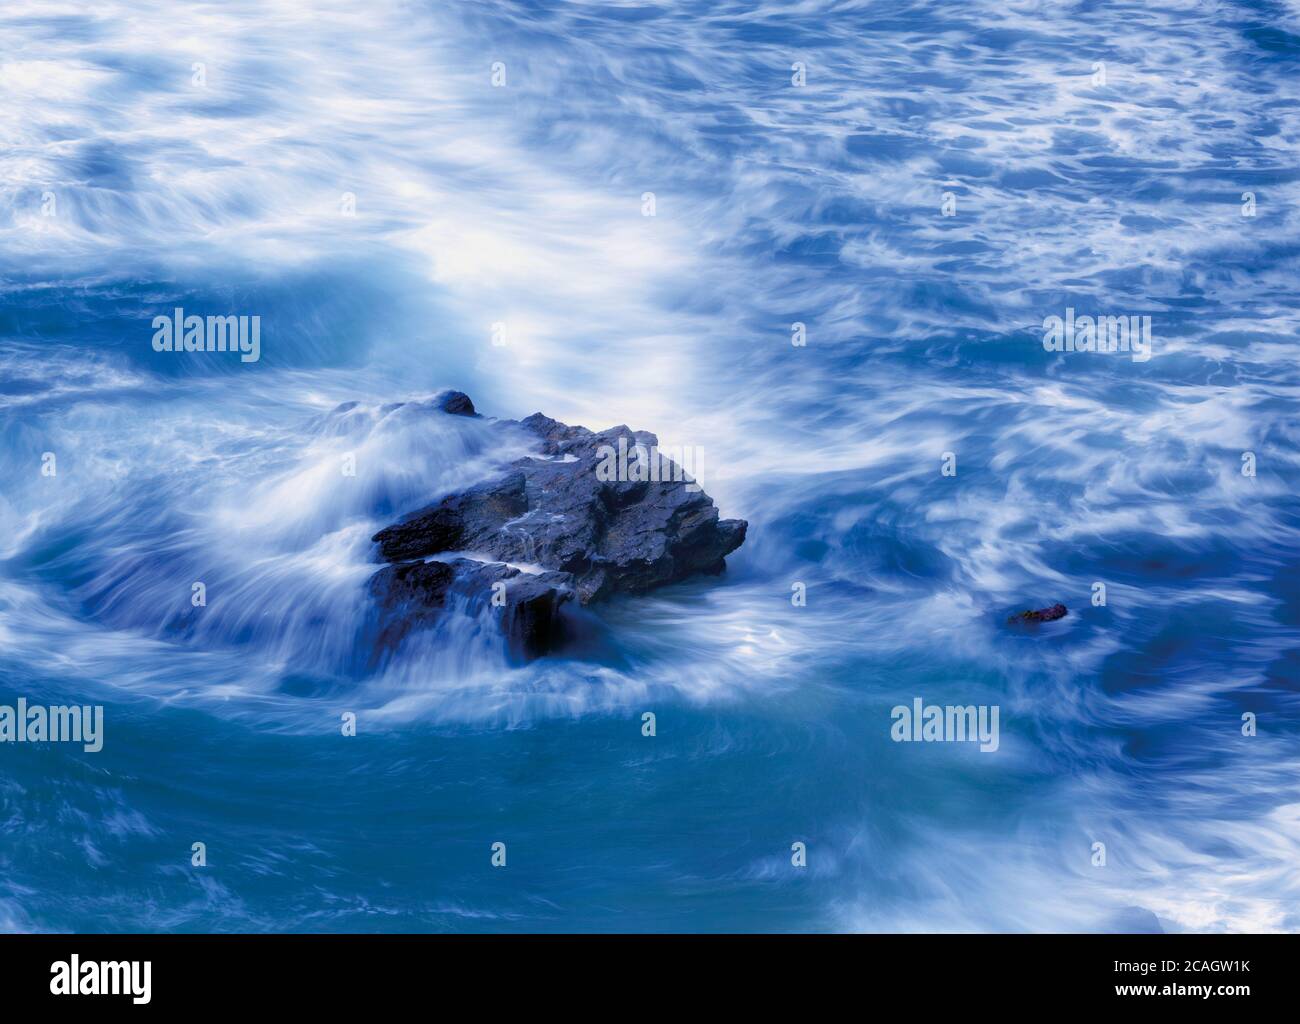 Water swirling around a rock in the sea. Stock Photo